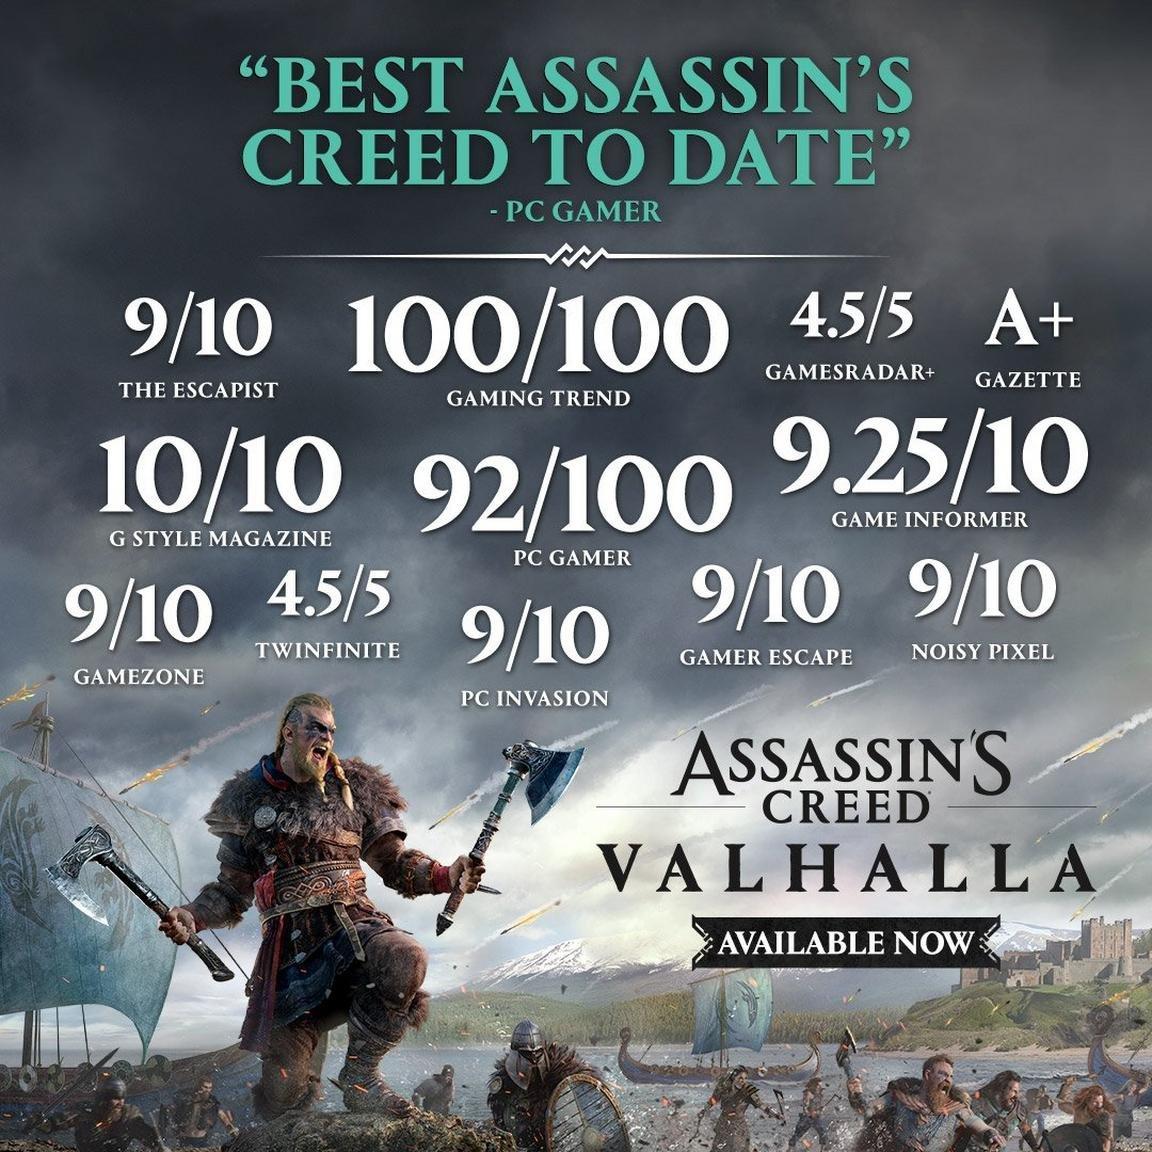 Assassin's Creed Valhalla: Wrath of the Druids DLC